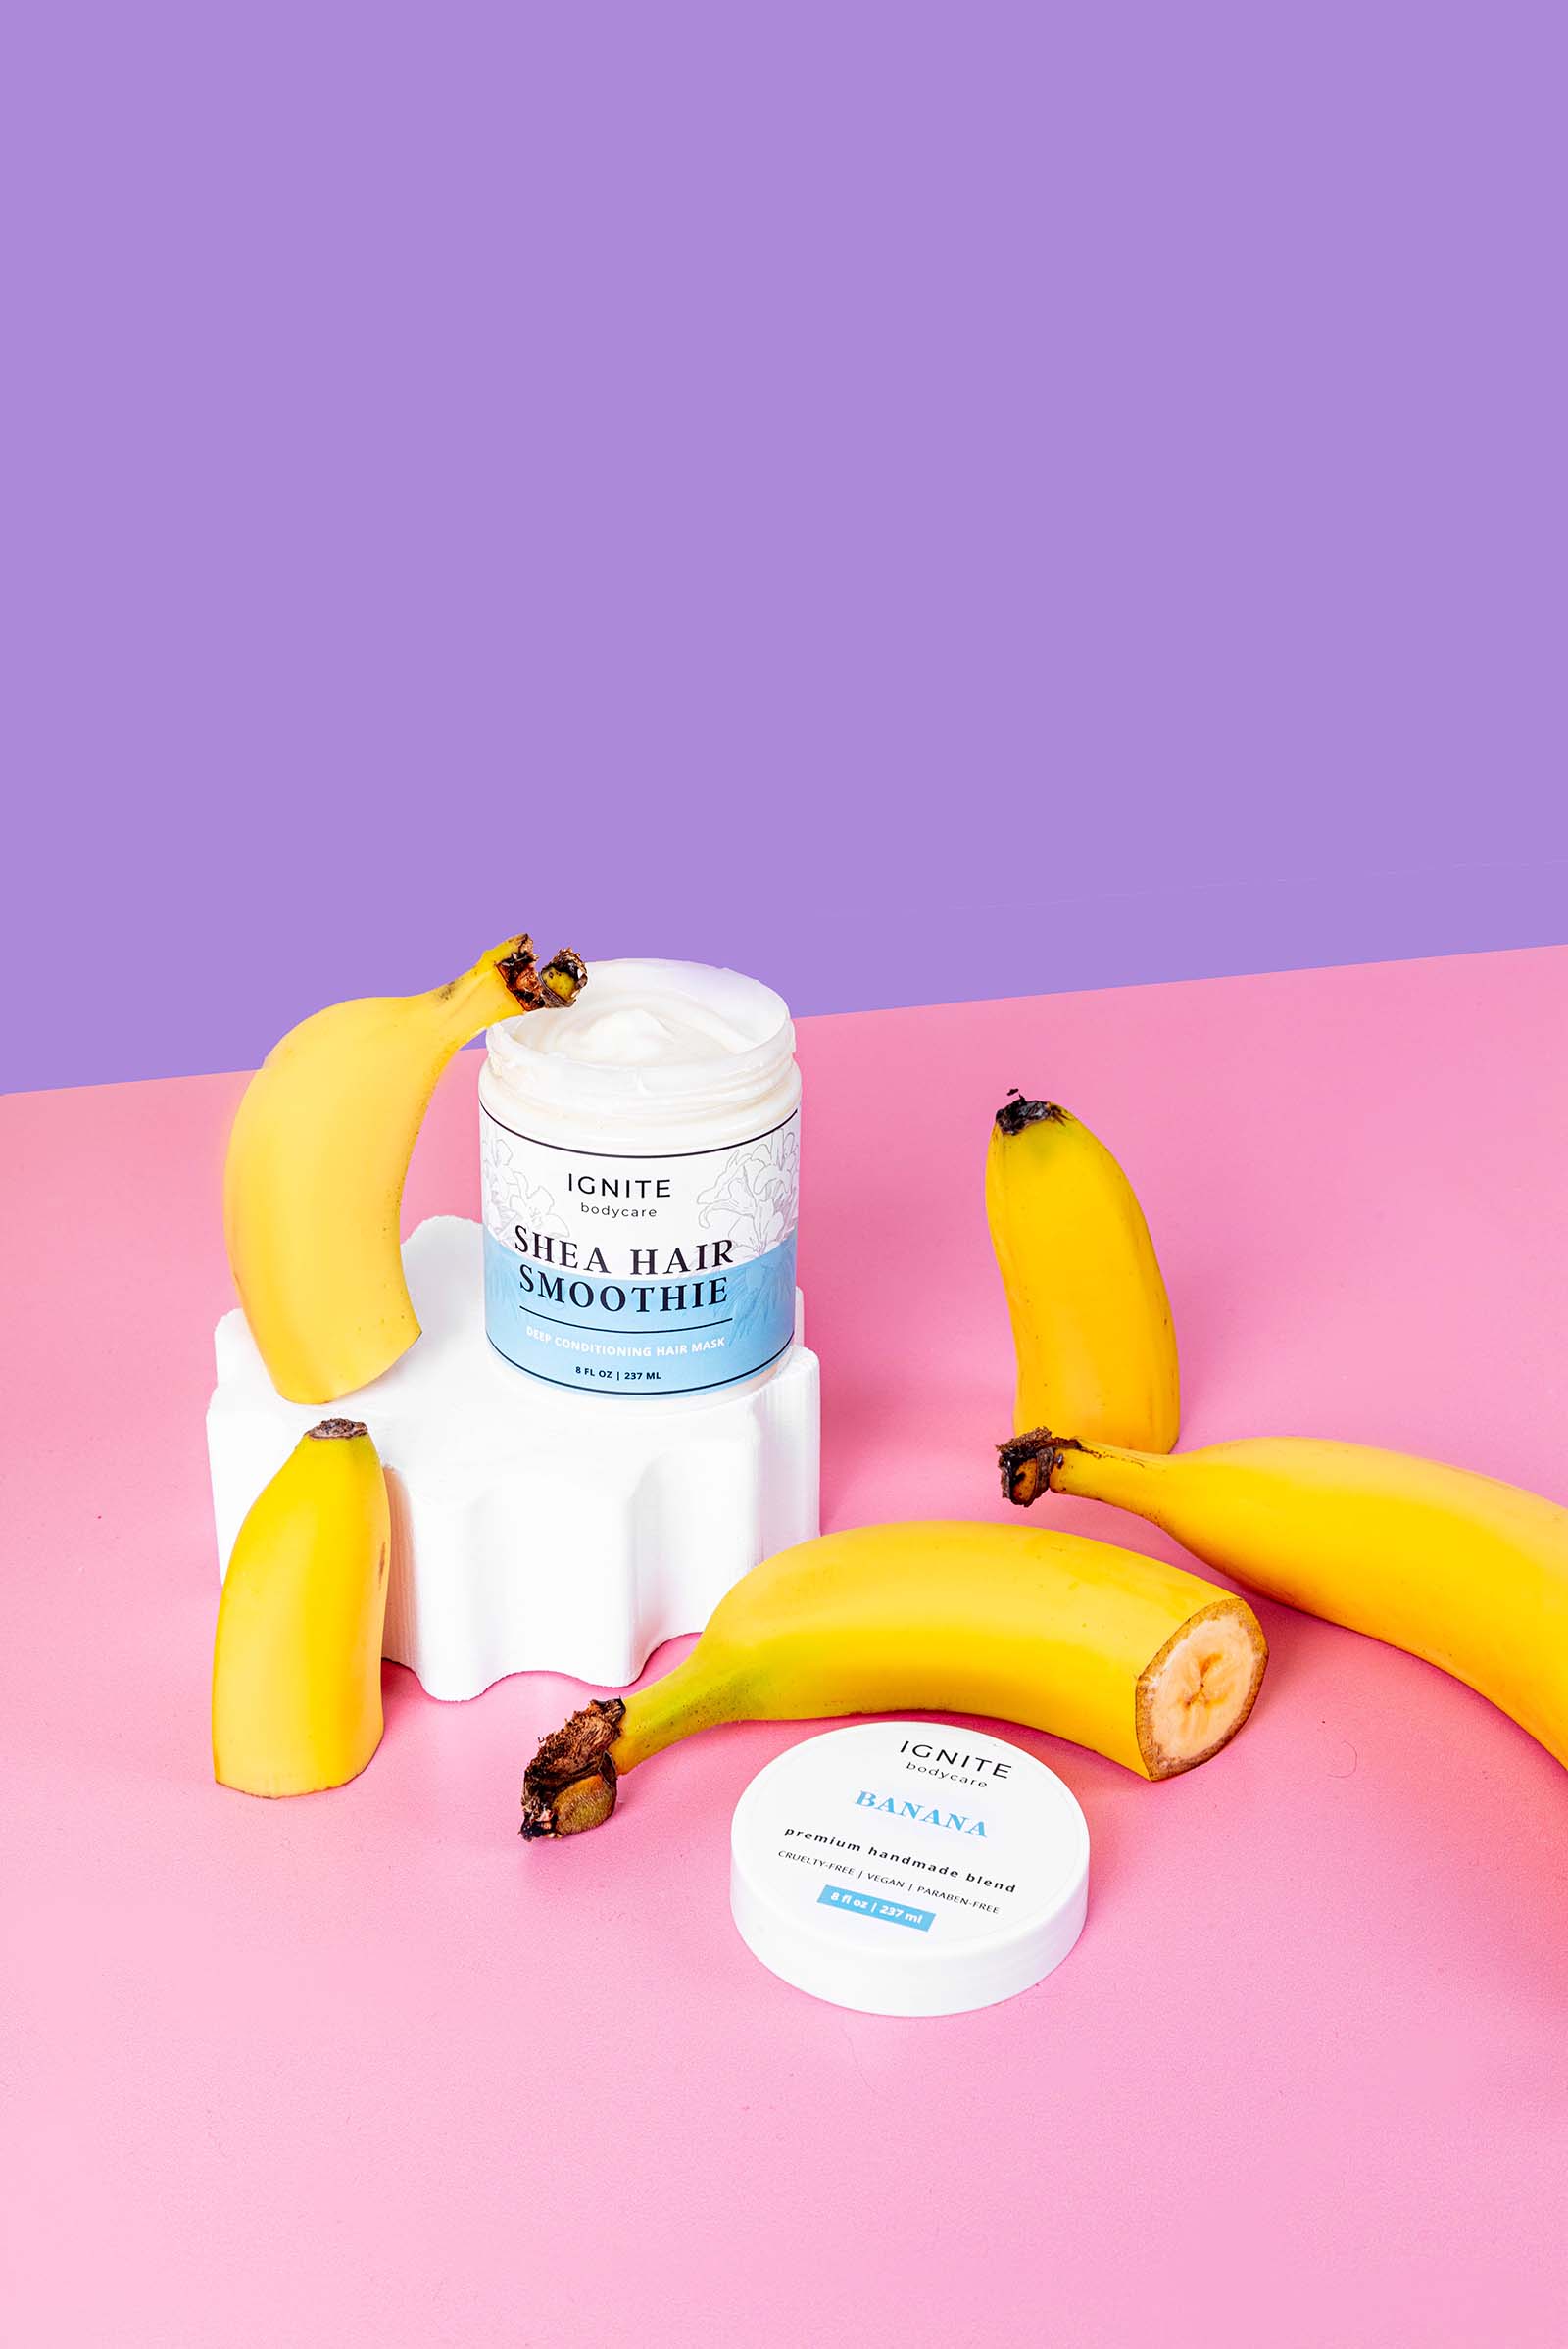 Colourful Content Creation for a Skincare Brand. Styled Product Photography by Megzie Makes